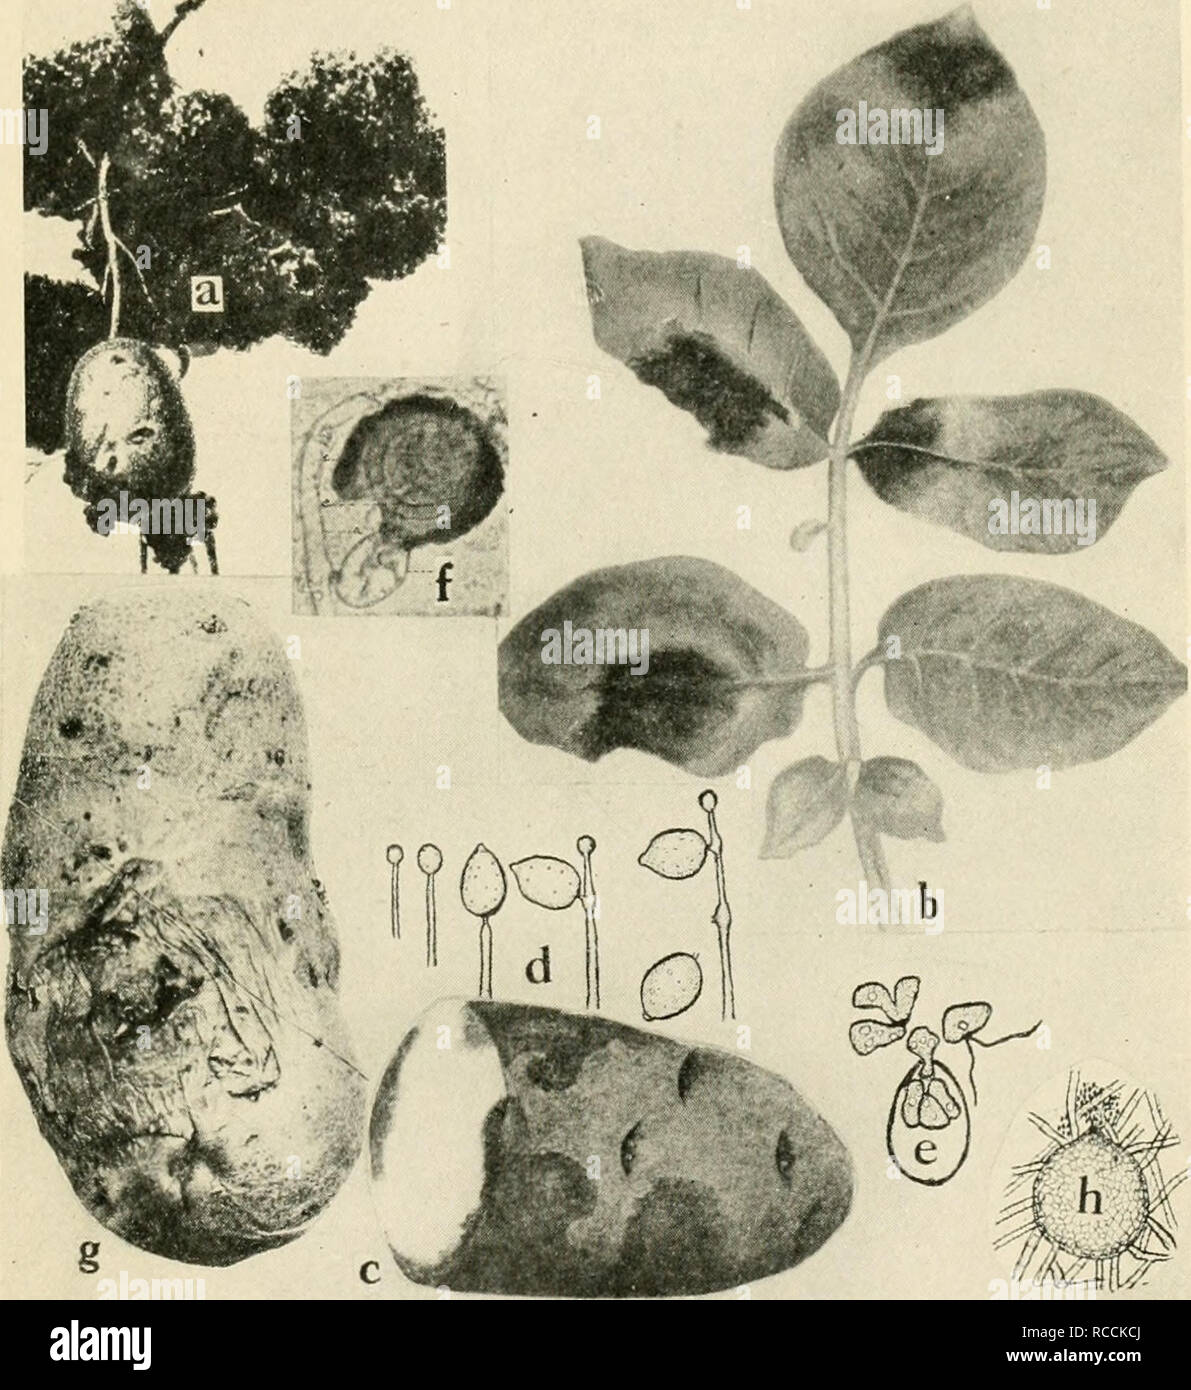 . Diseases of truck crops and their control. Vegetables. Fig. 6i. Potato Diseases. a. Black wart (after Giissow), b. late blight on foliage, c. late blight on tuber, d. successive stages of the development of the conidia of Phyiophlhora infeslans (b. and d. after L. R. Jones), e. germination of conidia of Phytophthora infestuns, by means of zoopores (after Ward),/, mature oogonium of P. infcstans (after Clinton), g. melters, surface view, early stage of infection, h. pycnidium of Phoina titberosa (after Melhus and Rosenbaum).. Please note that these images are extracted from scanned page image Stock Photo